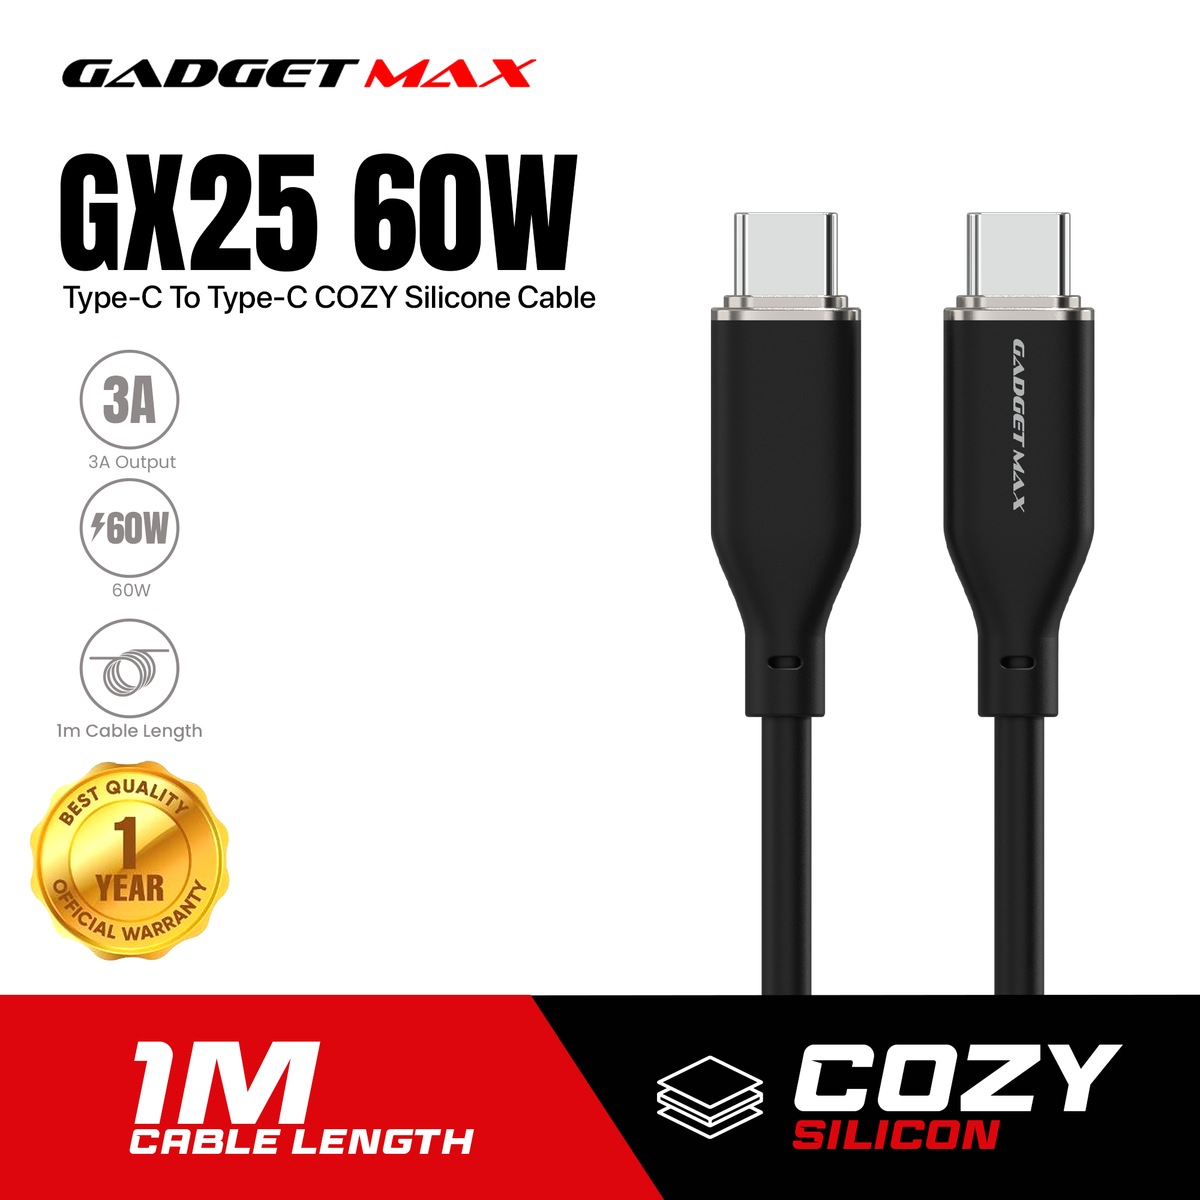 GADGET MAX GX25 60W TYPE C TO TYPE C 3A MAX COZY SILCONE CABLE (1M)(60W) - BLACK